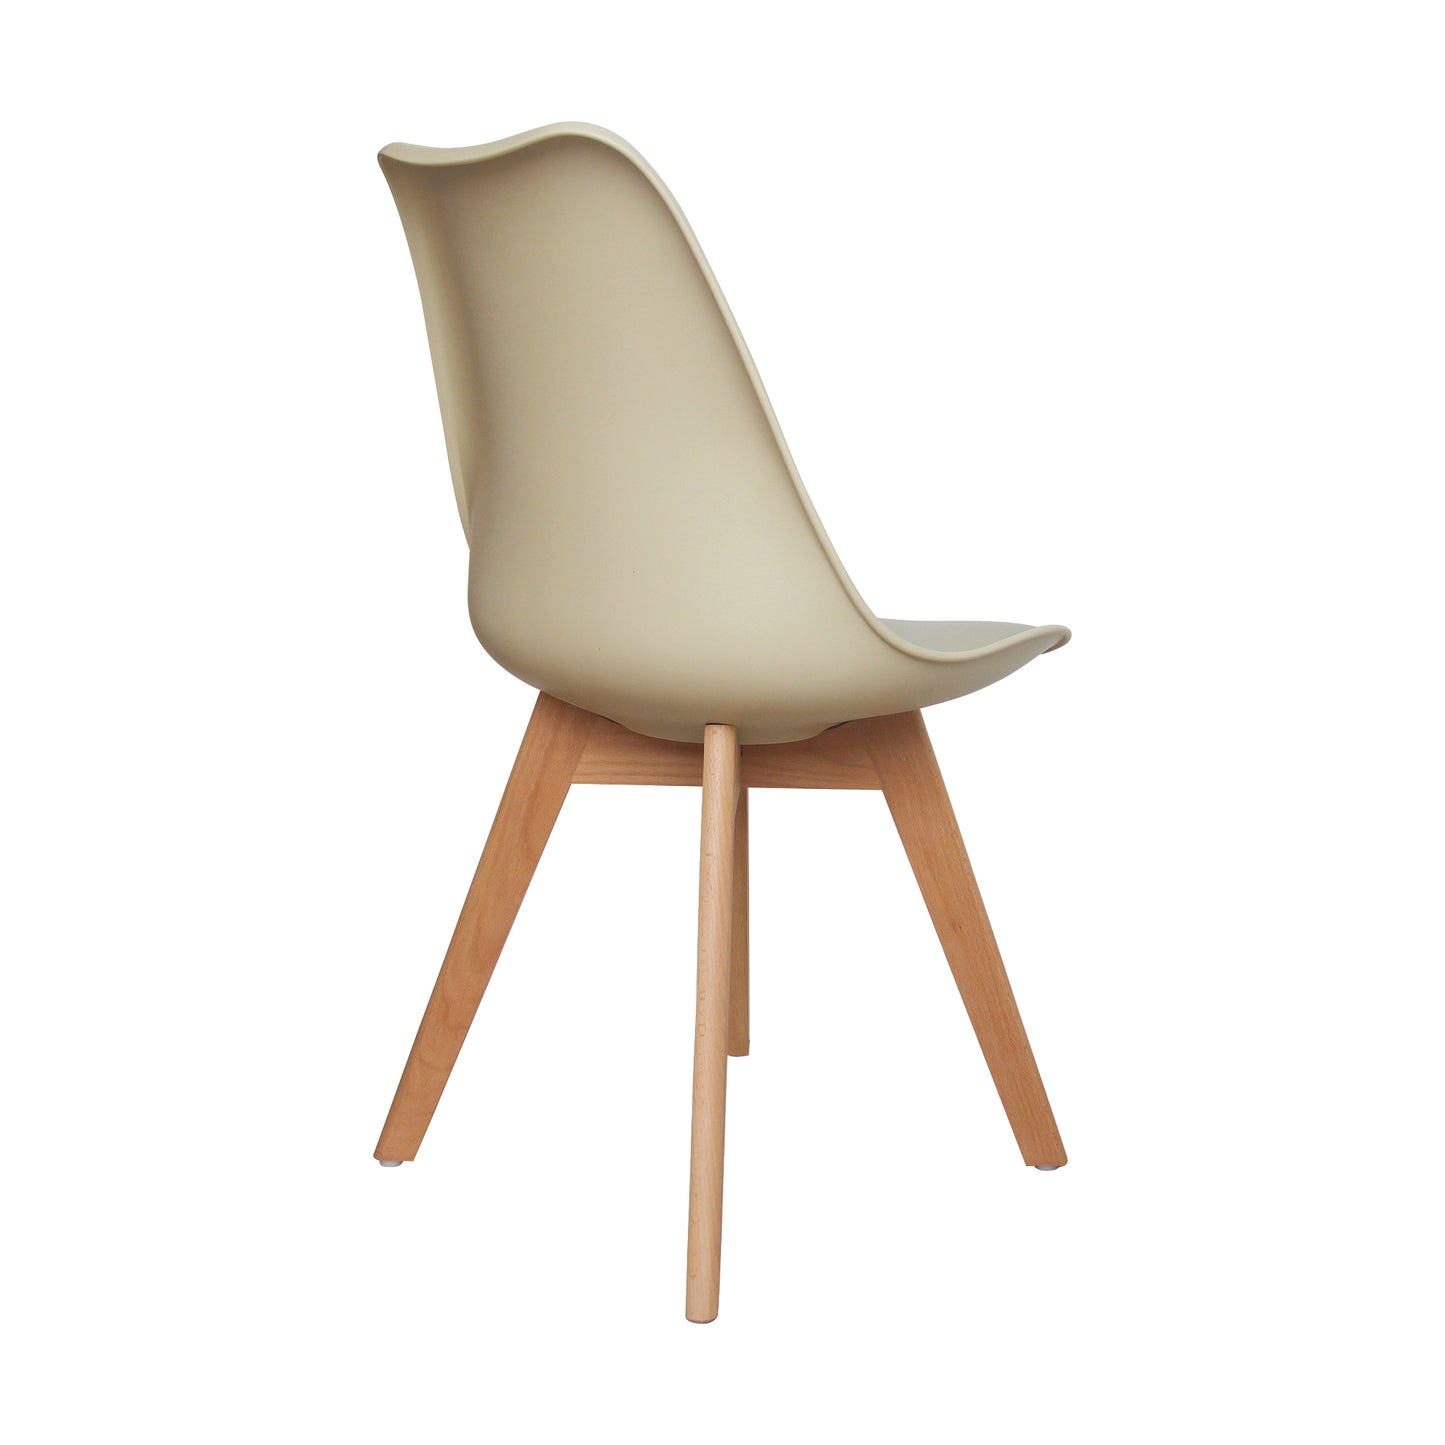 CHOTTO - Ando Dining Chairs - Beige x 2